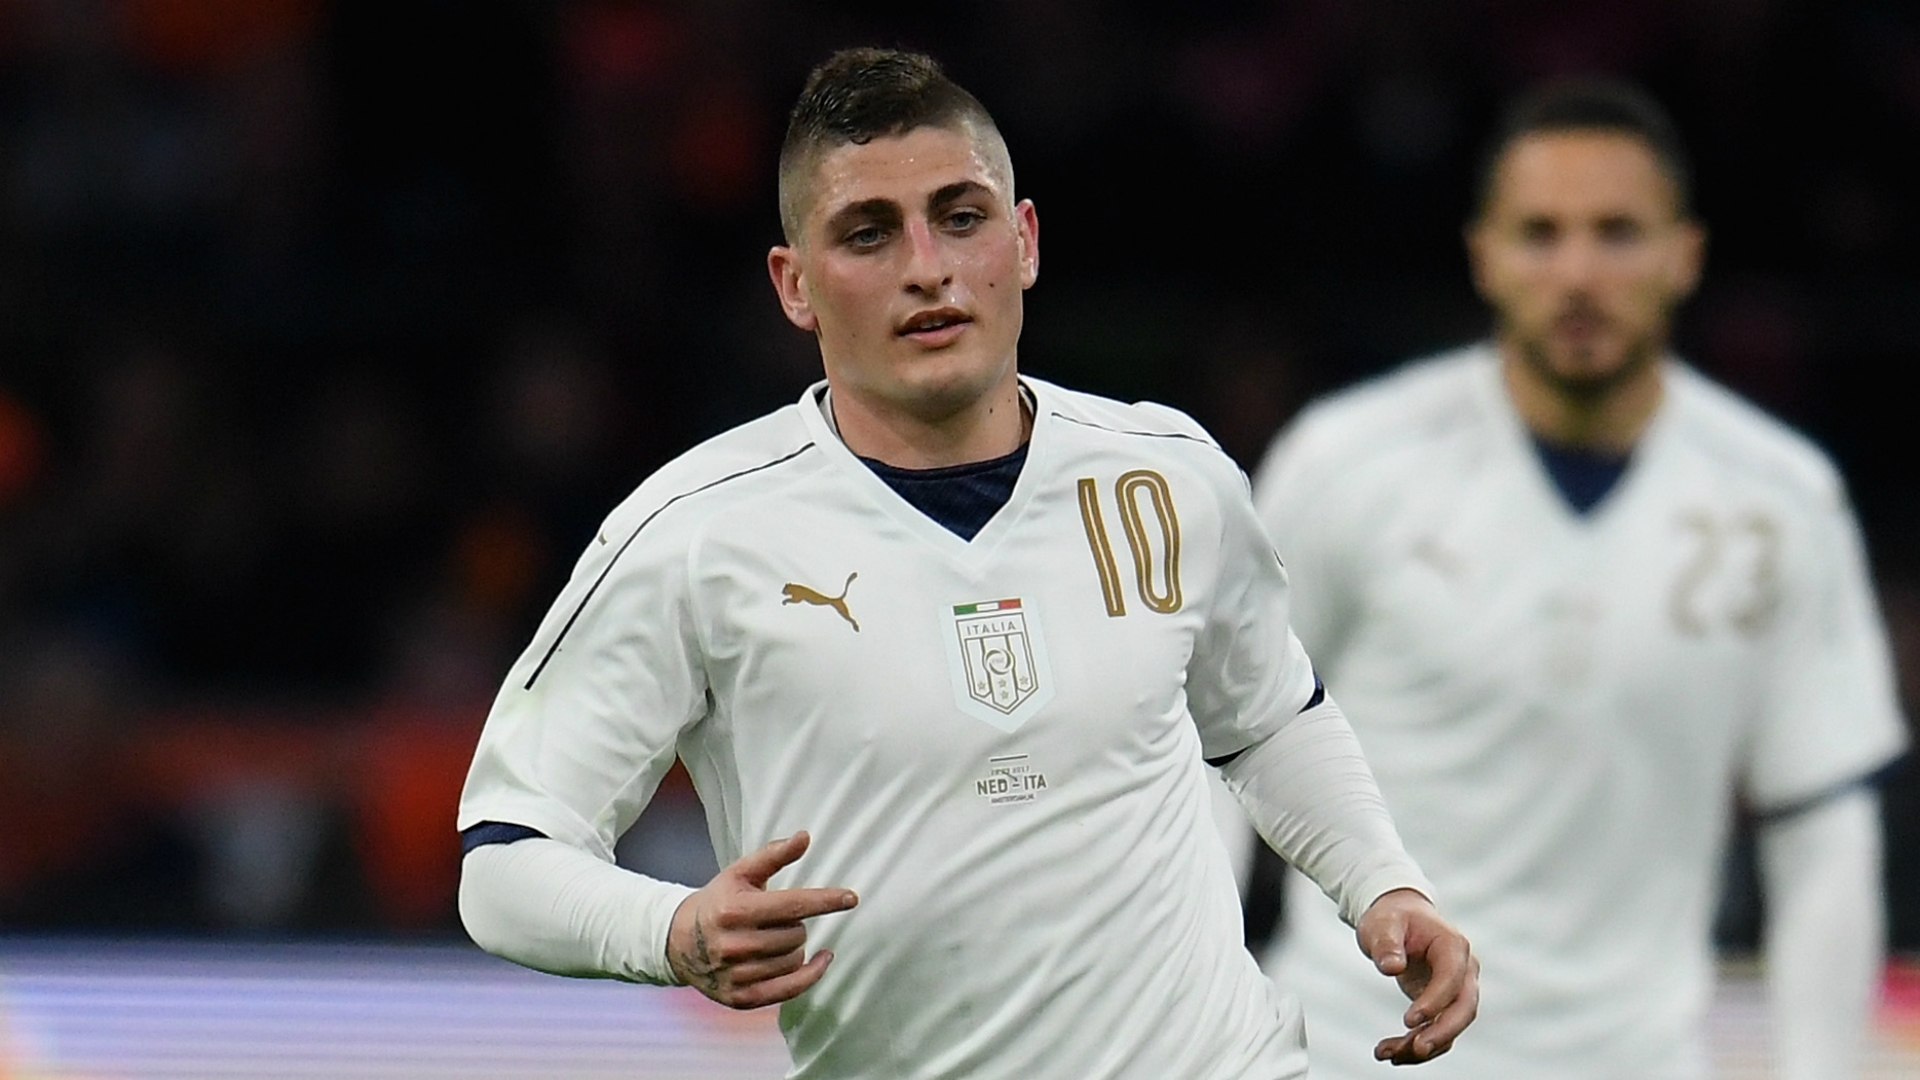 The promises that Verratti is speaking about have mostly to do with investing in world-class transfers.